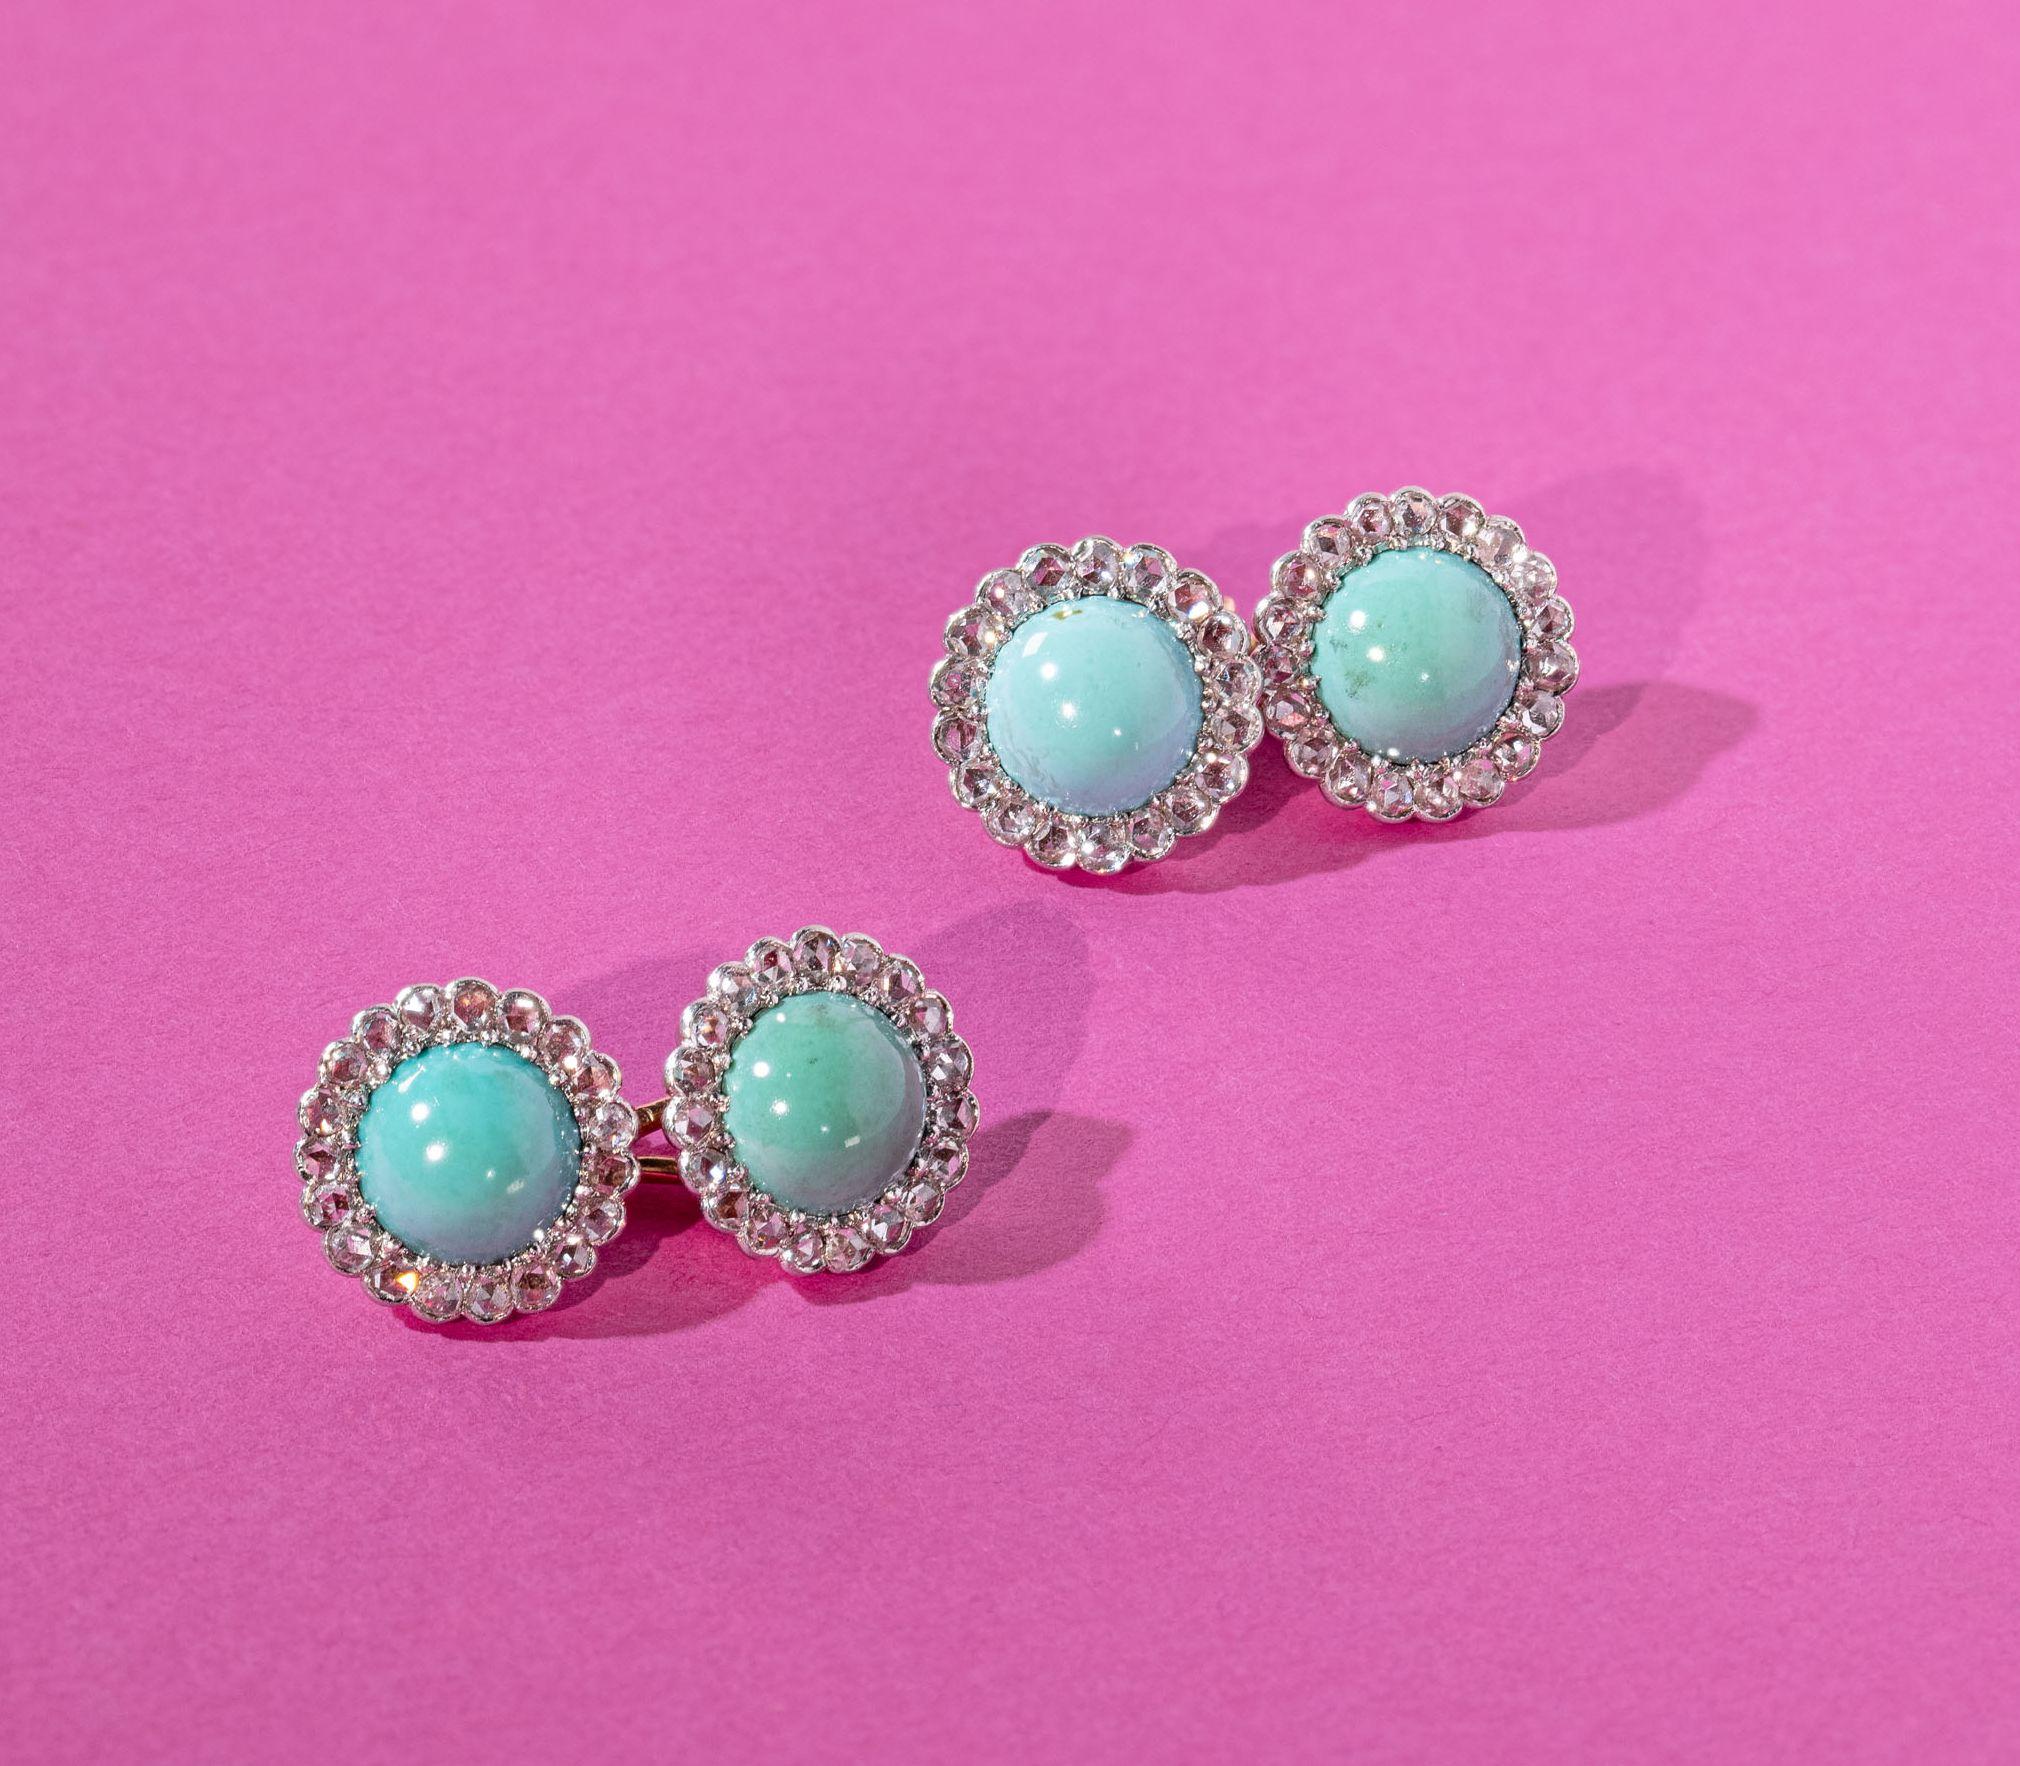 These charming cufflinks are set with turquoise cabochons surrounded by rose-cut diamonds.
End of 19th Century, French import assay marks.
Elegant during daytime or sparkling in the evening.